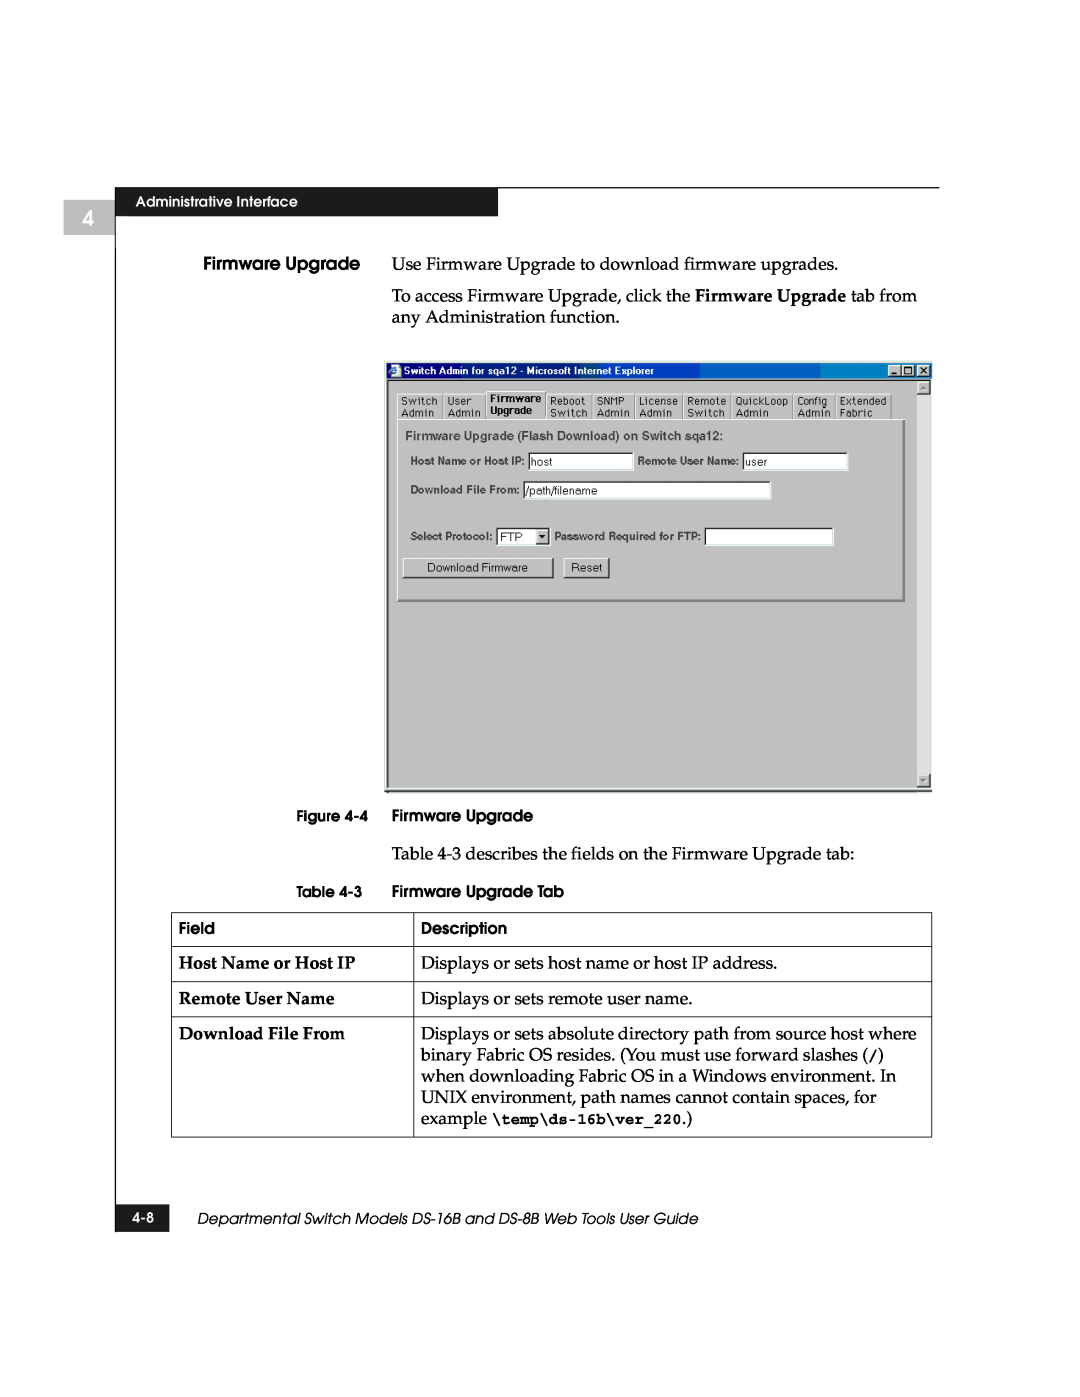 EMC DS-8B manual Host Name or Host IP, Remote User Name, Download File From 